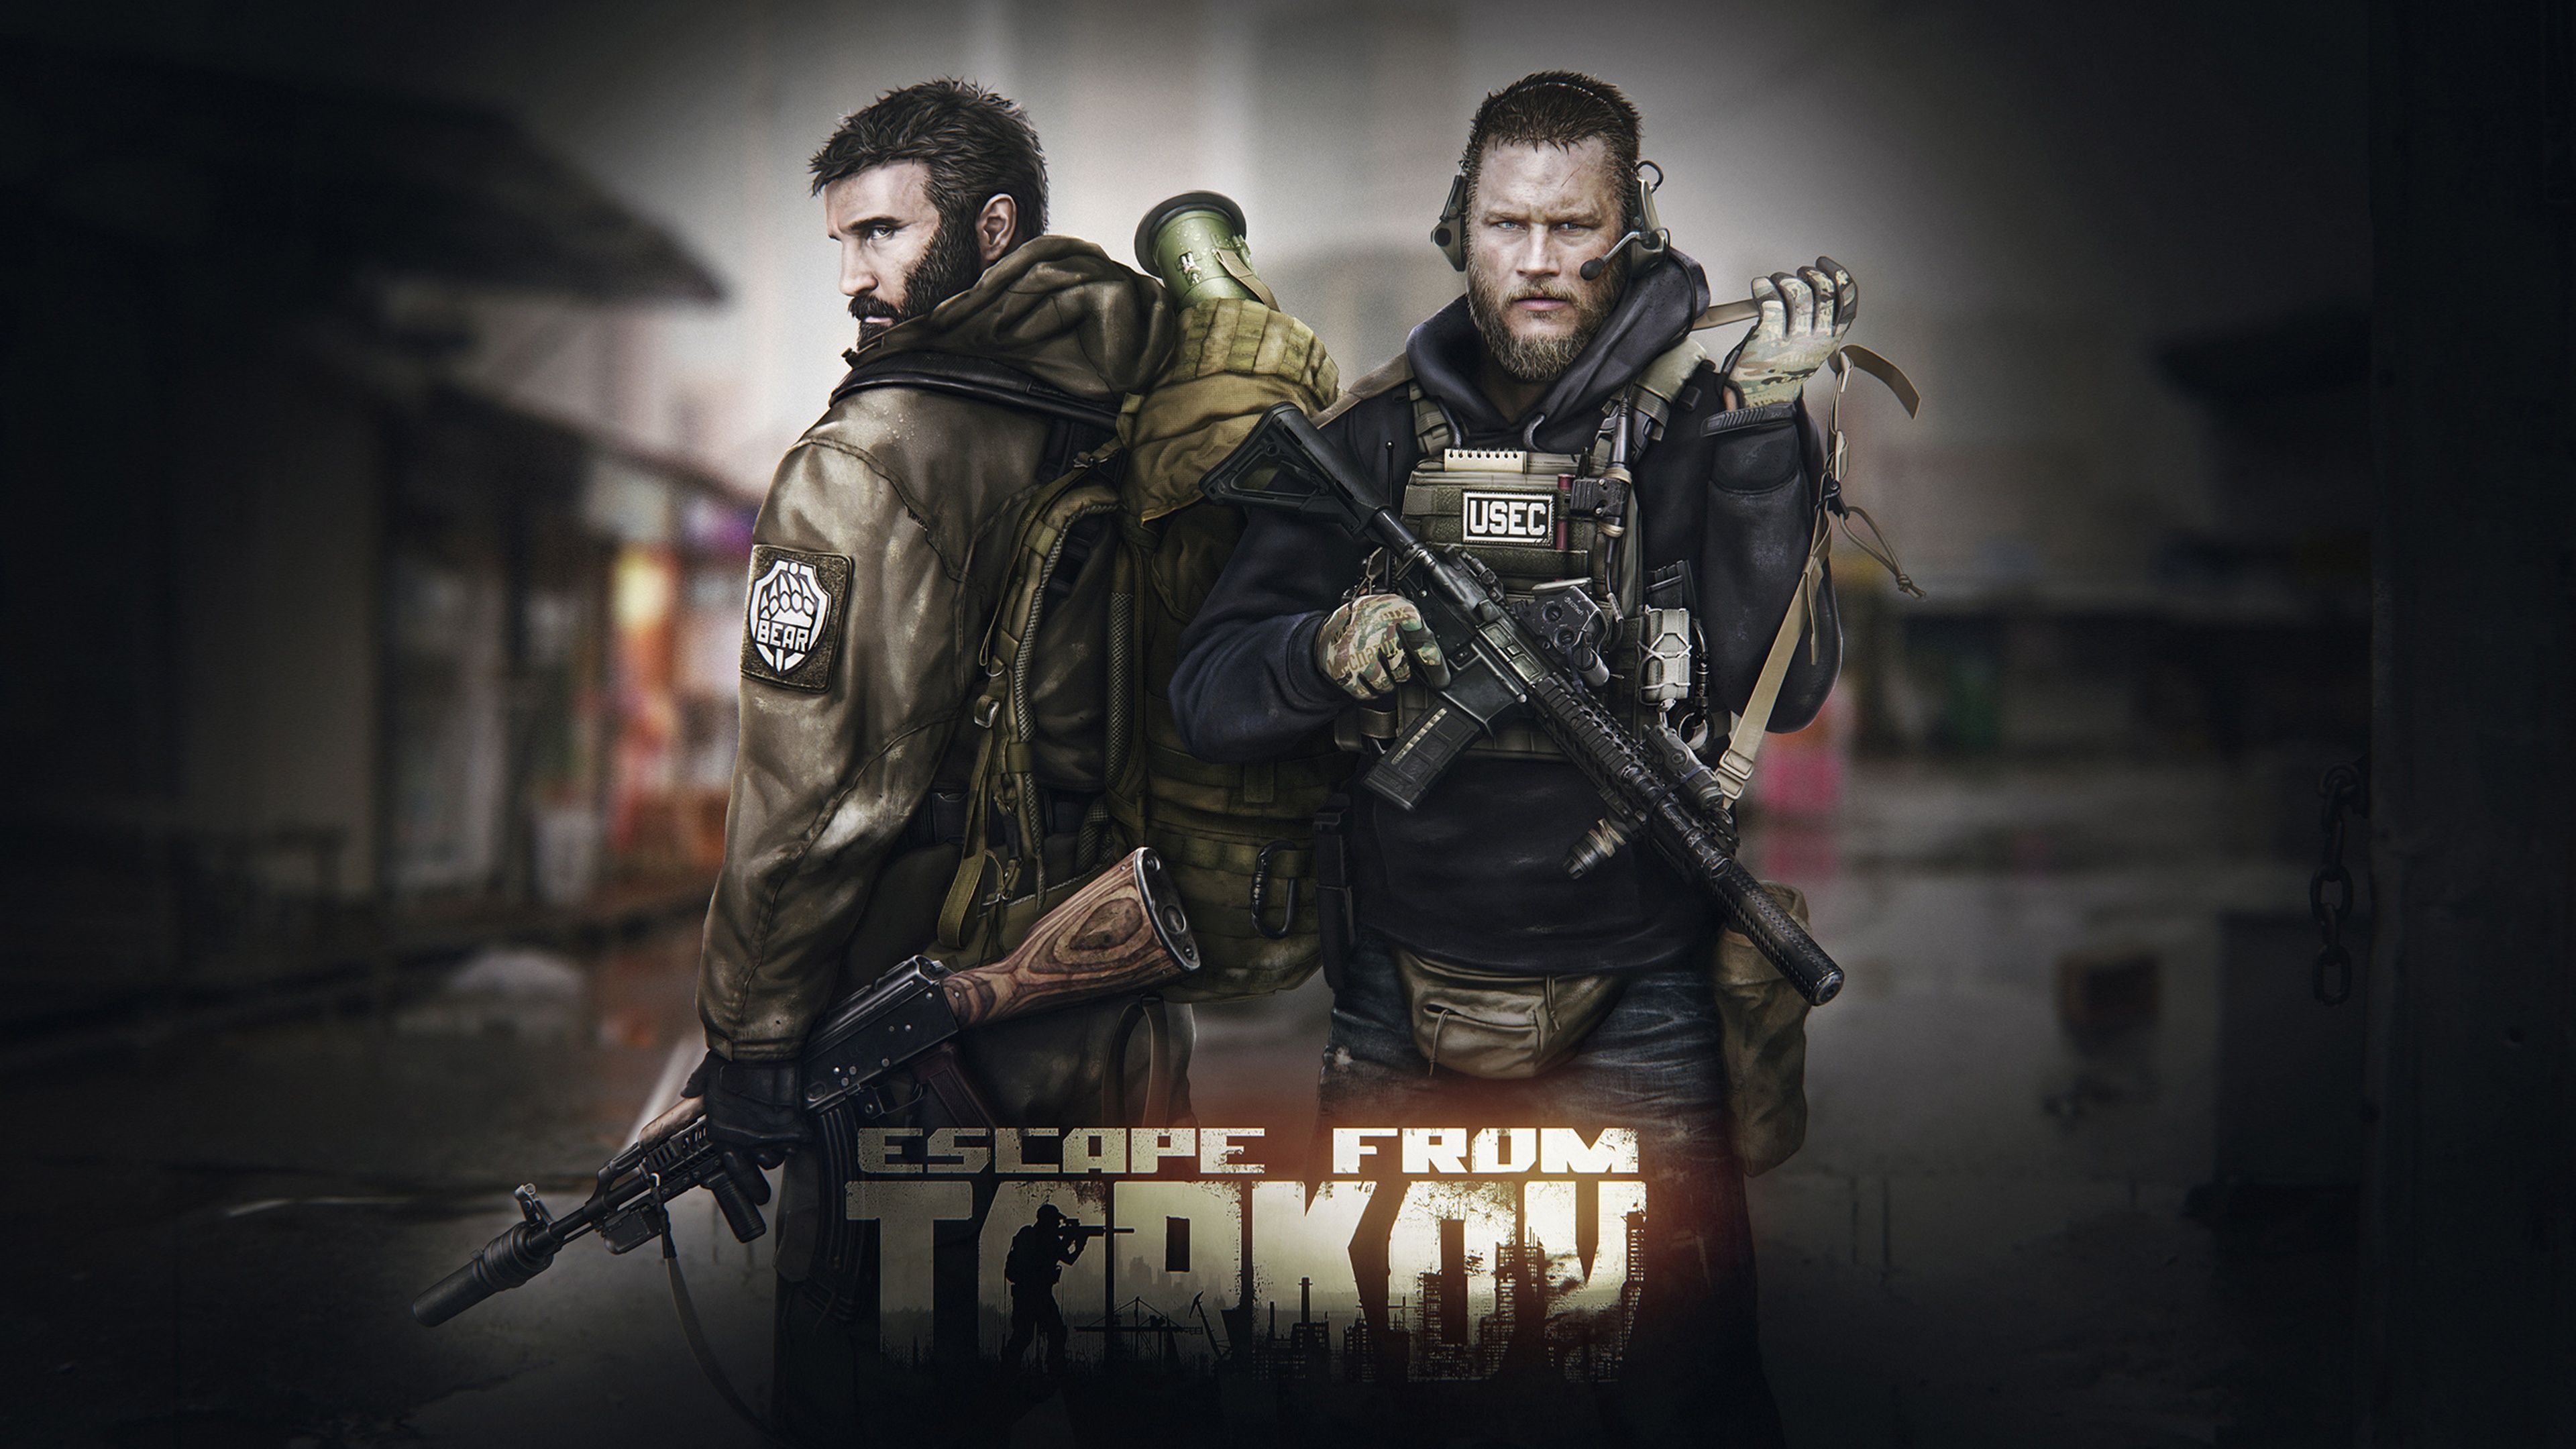 Escape From Tarkov 4K Game Wallpaper in jpg format for free download